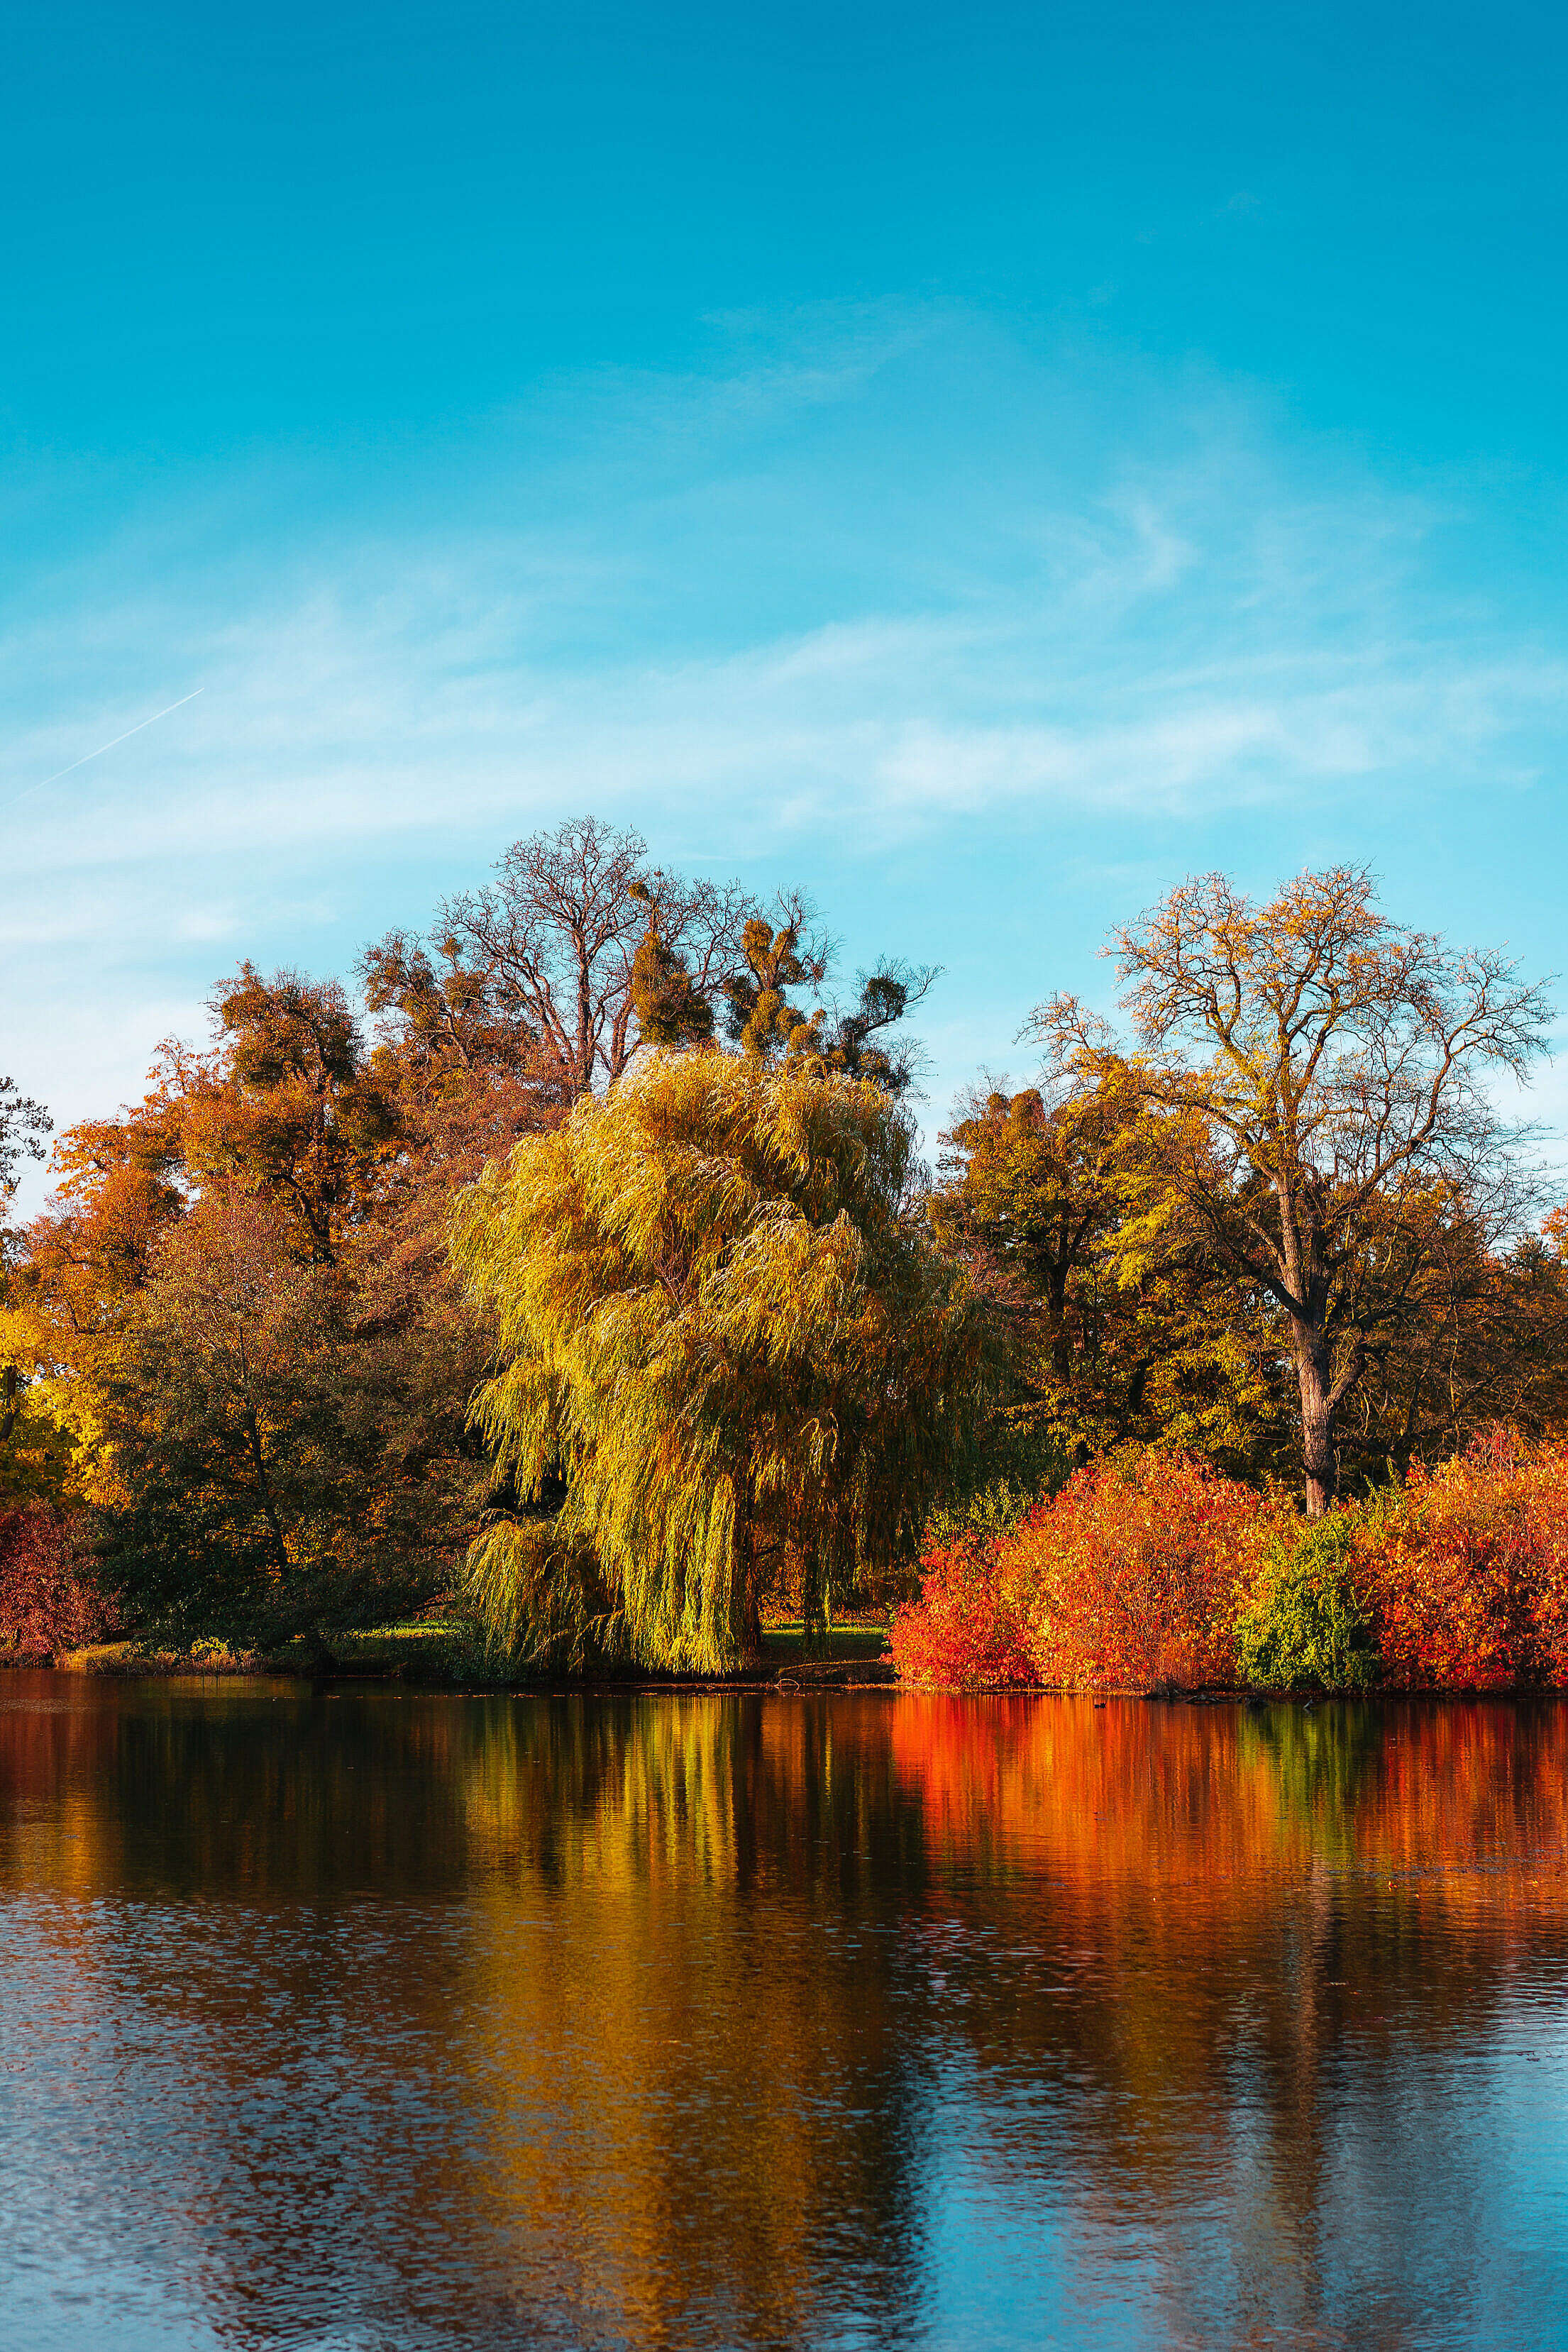 Autumn Colorful Trees in Fall Colors over a Lake Free Stock Photo